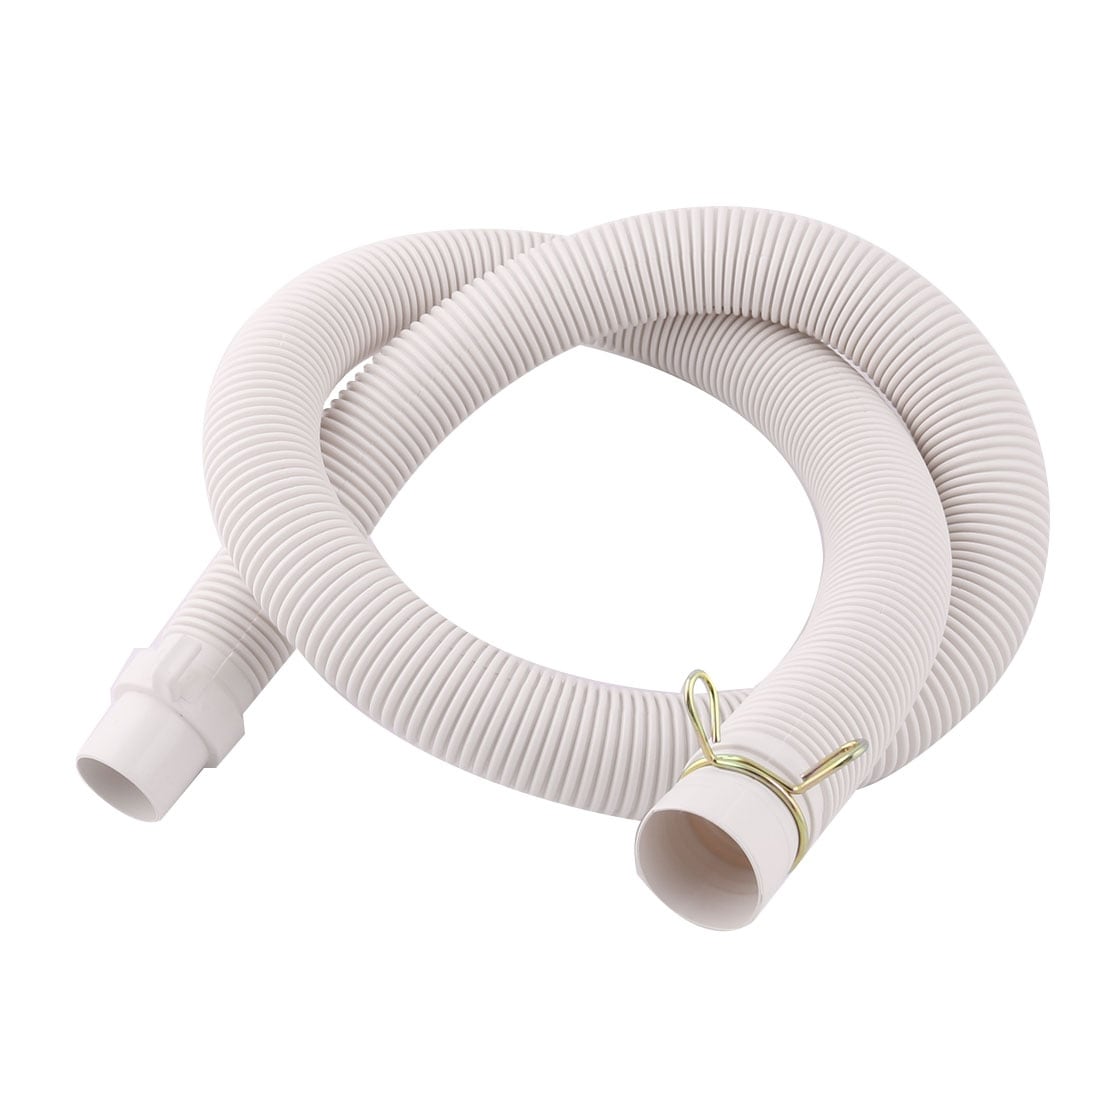 6 Feet Washing Machine Drain Hose by Eligara Universal Fit All Washer Drain Hose Extension/Replacement Kit Long Discharge Pipe